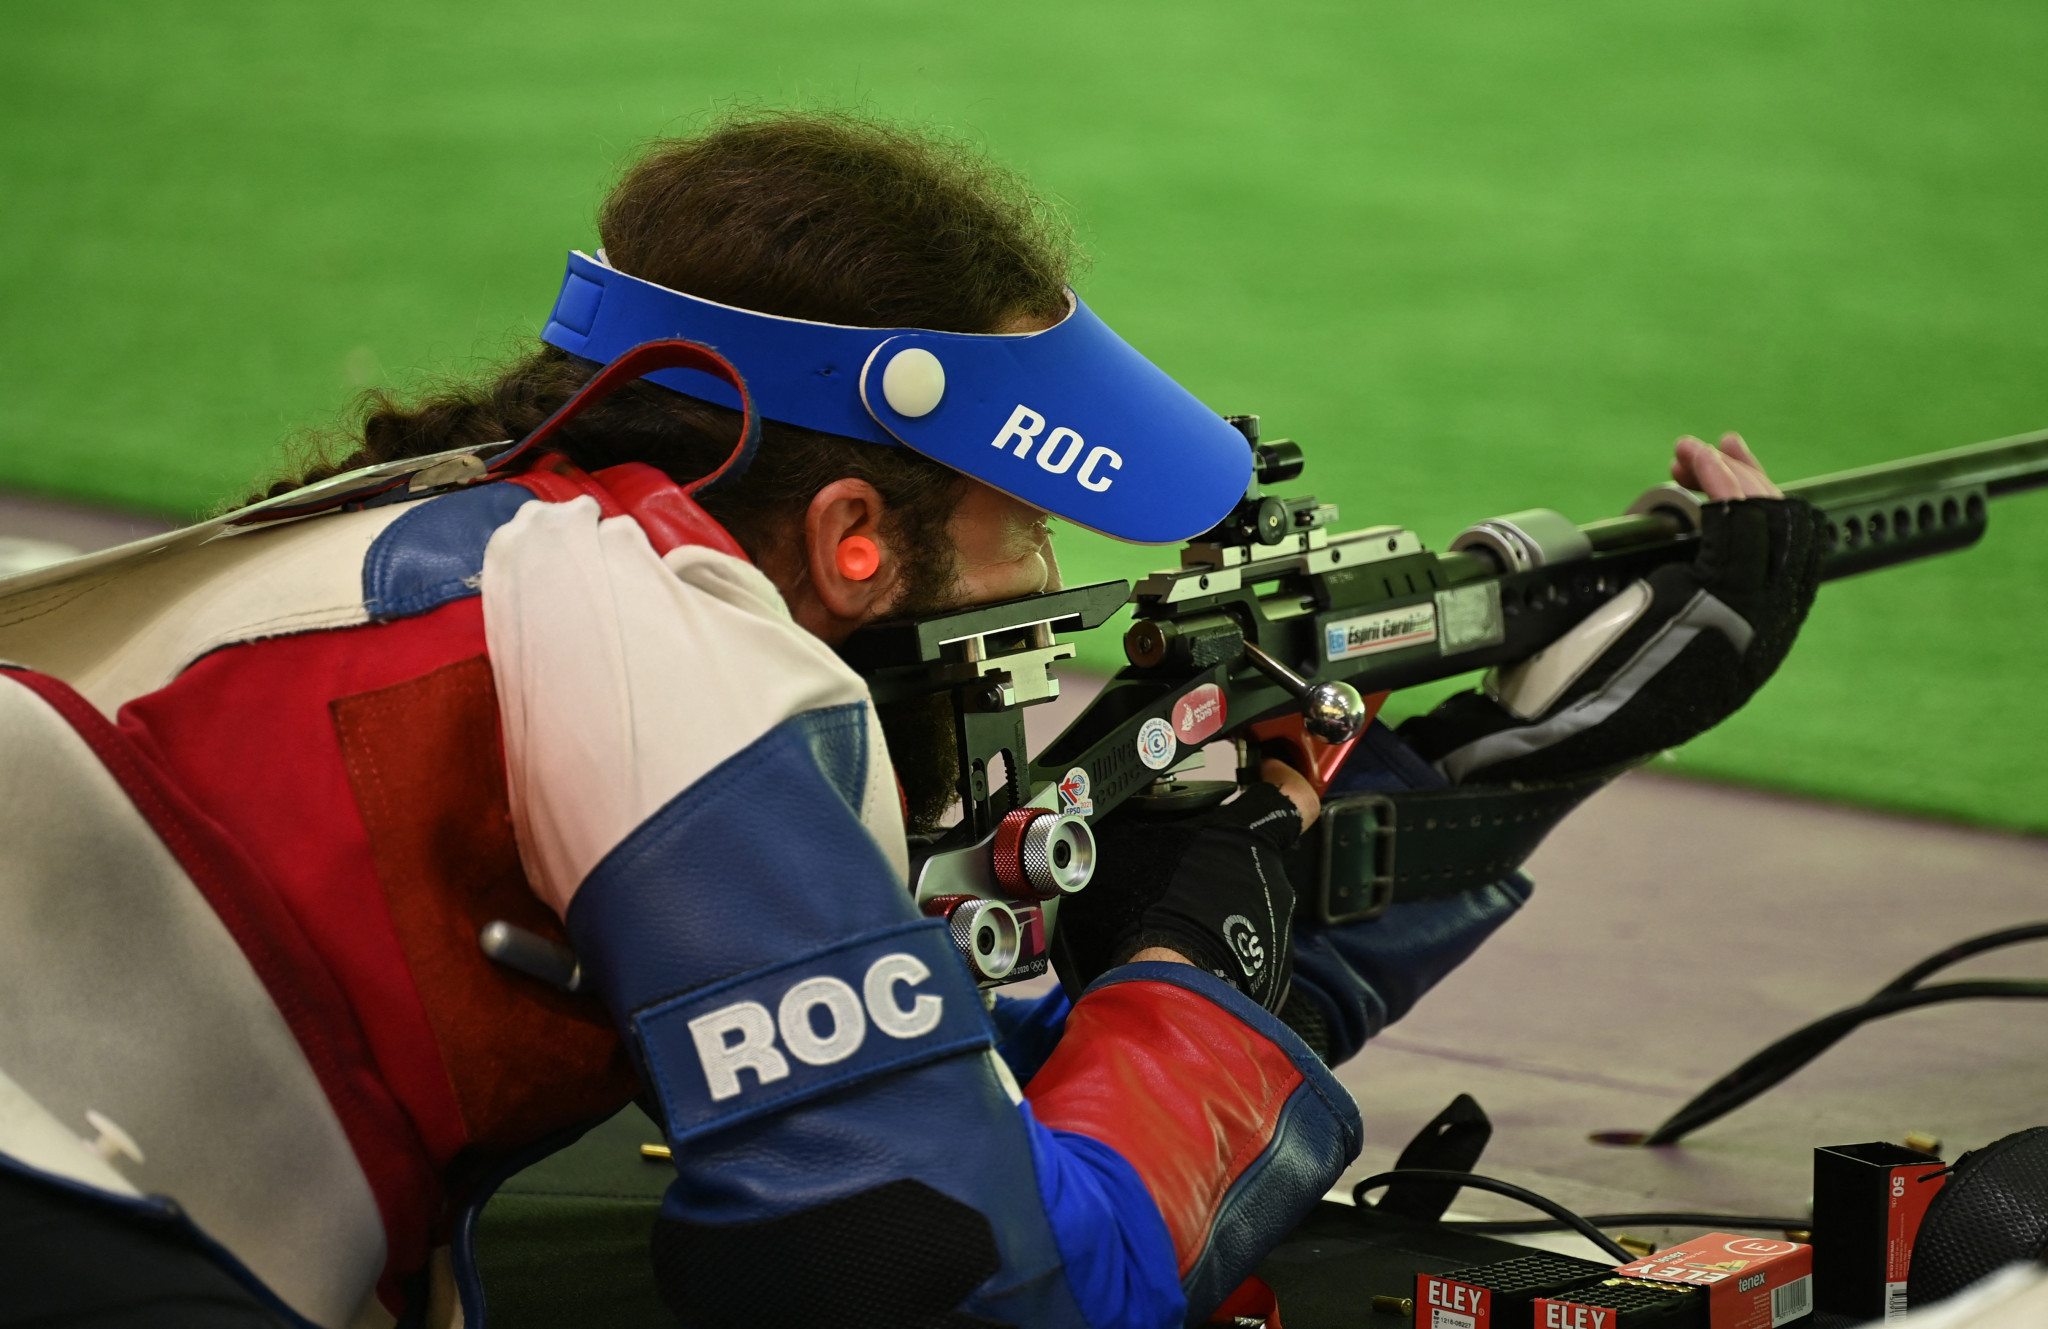 Russian shooters have been banned from international competition since March last year due to the invasion of Ukraine ©Getty Images